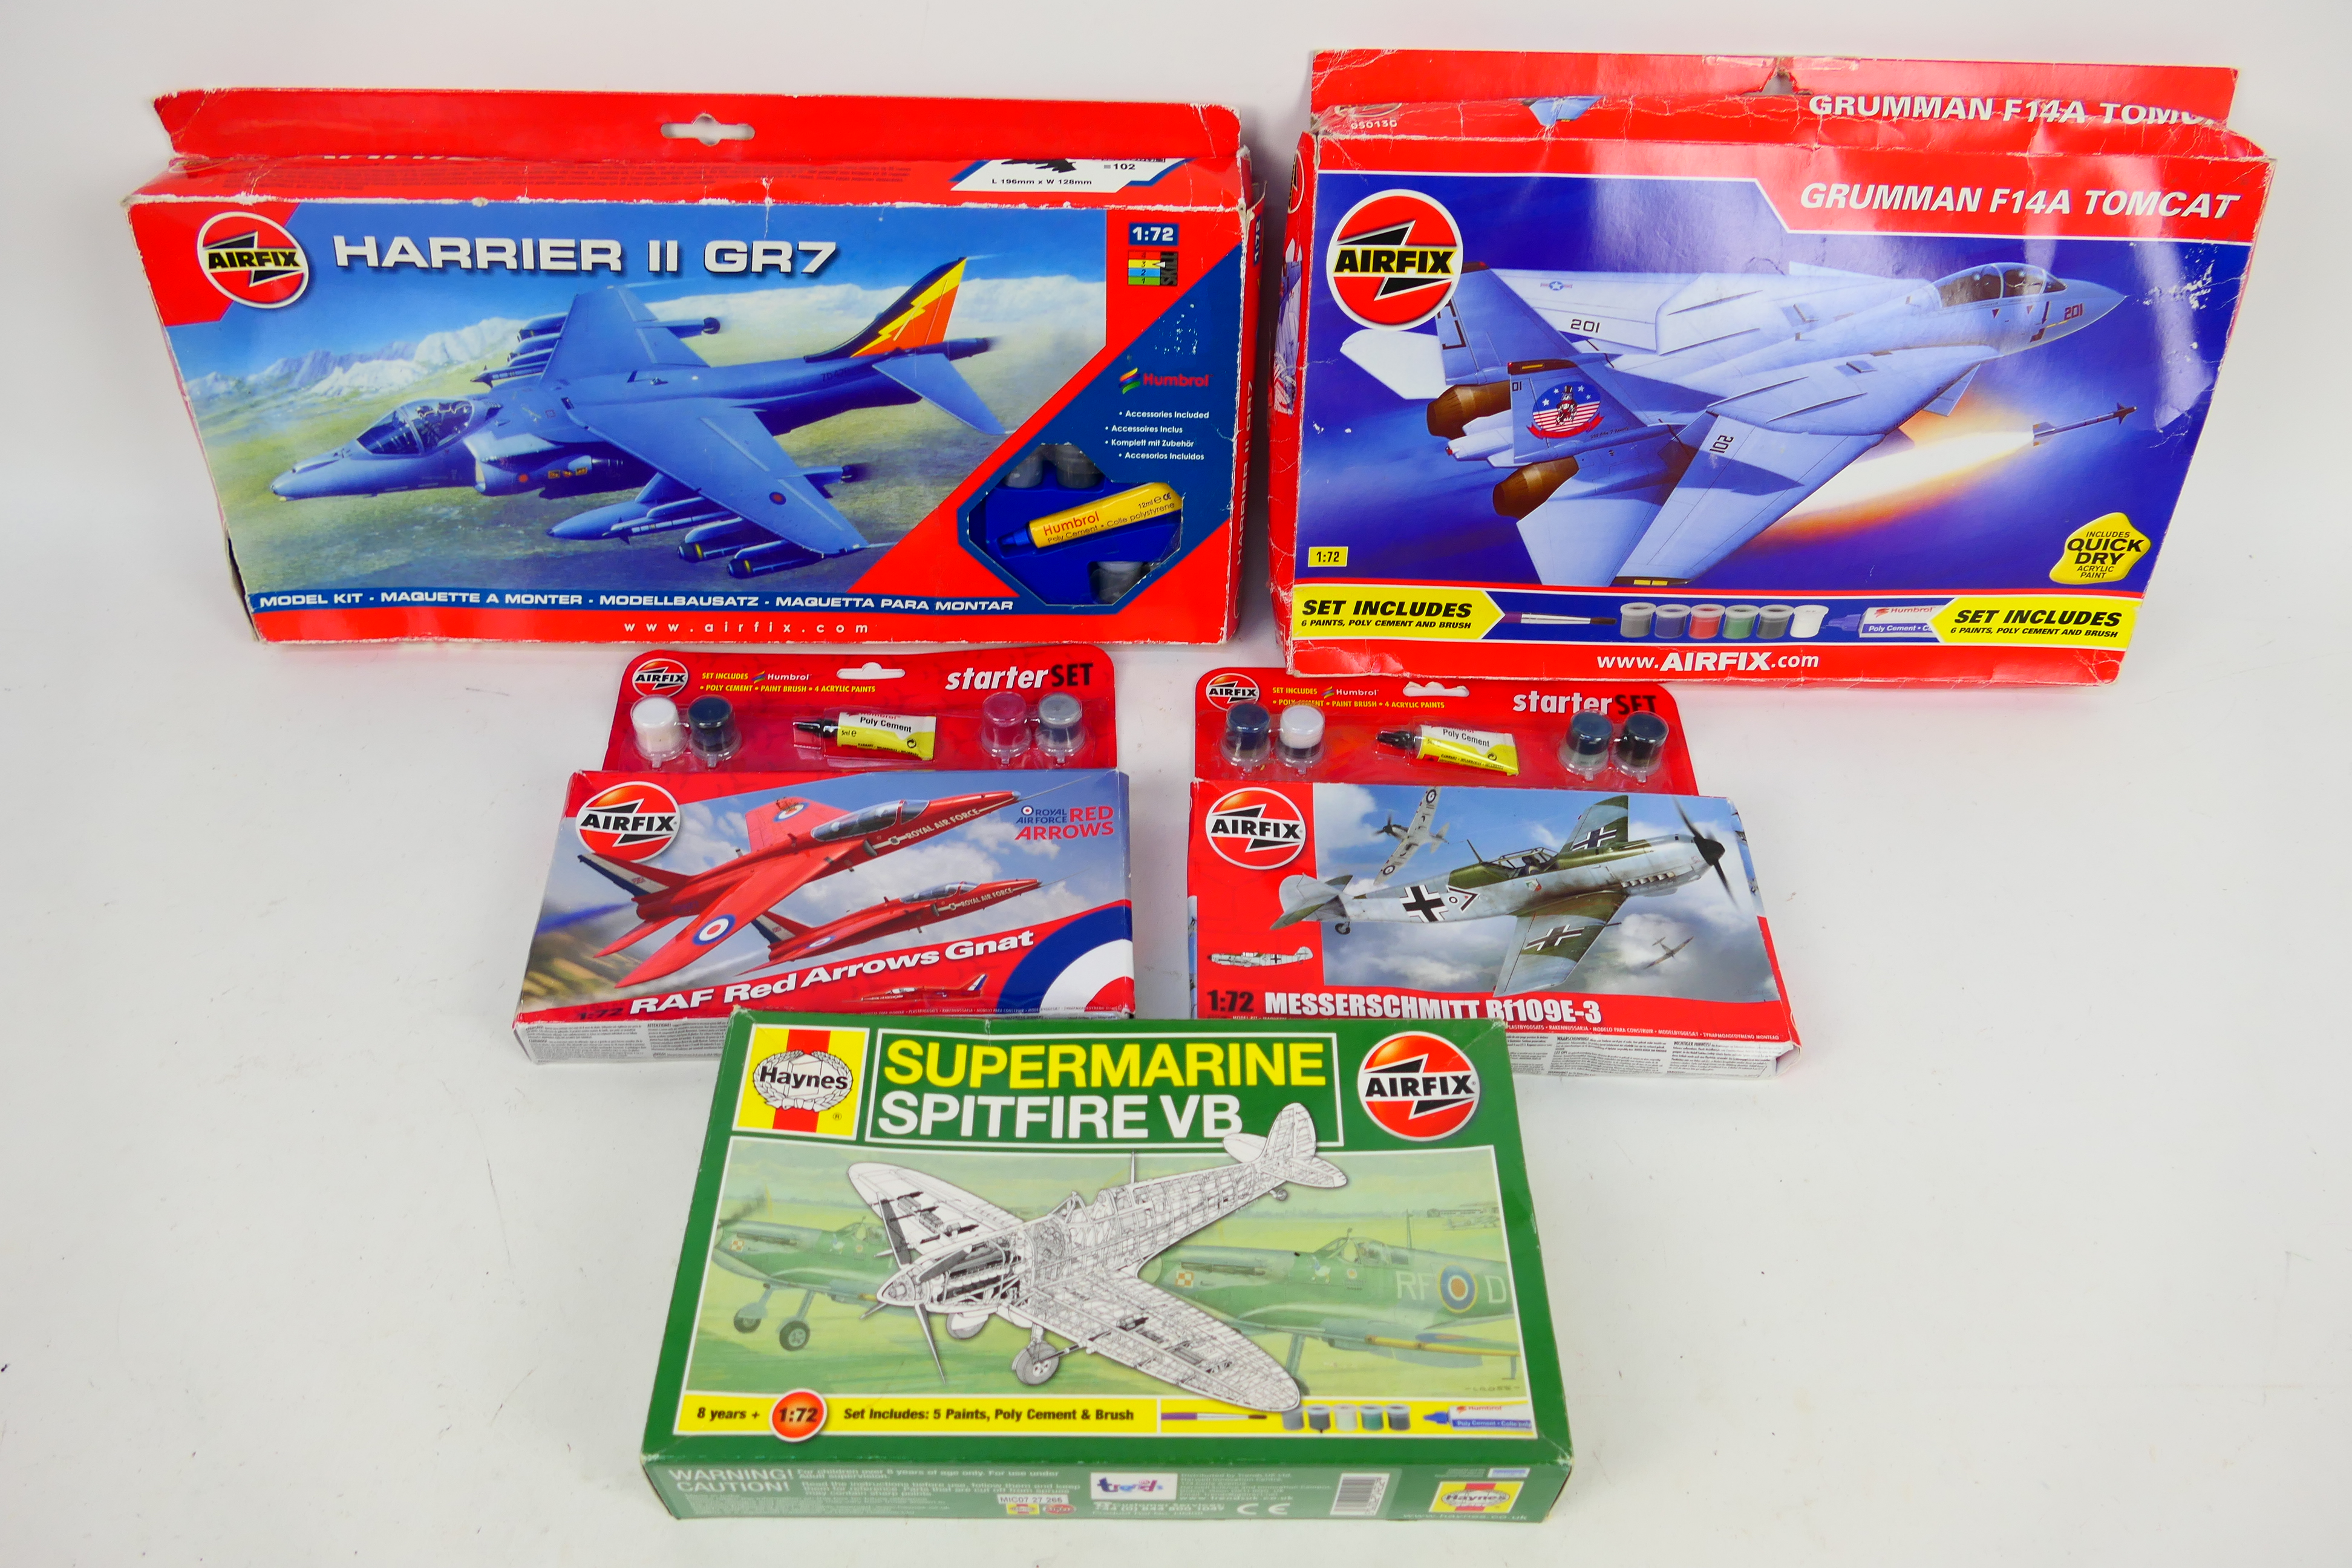 Airfix - Five boxed plastic model military aircraft kits in 1:72 scale.